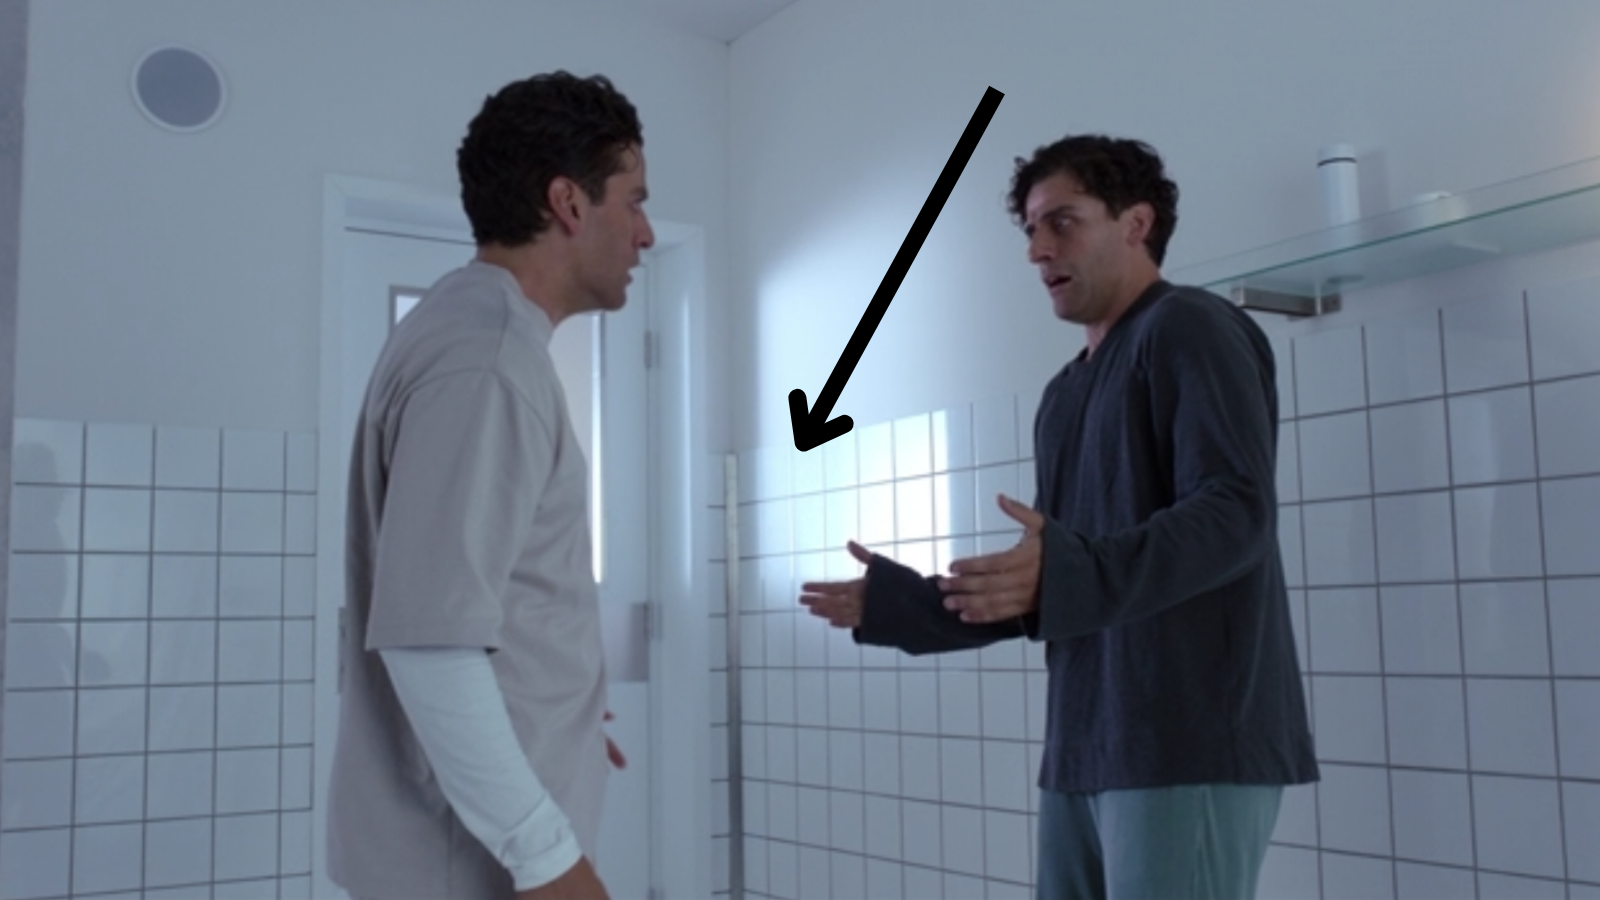 Marc and Steven in a hospital with an arrow pointing out the line that their hands don't cross